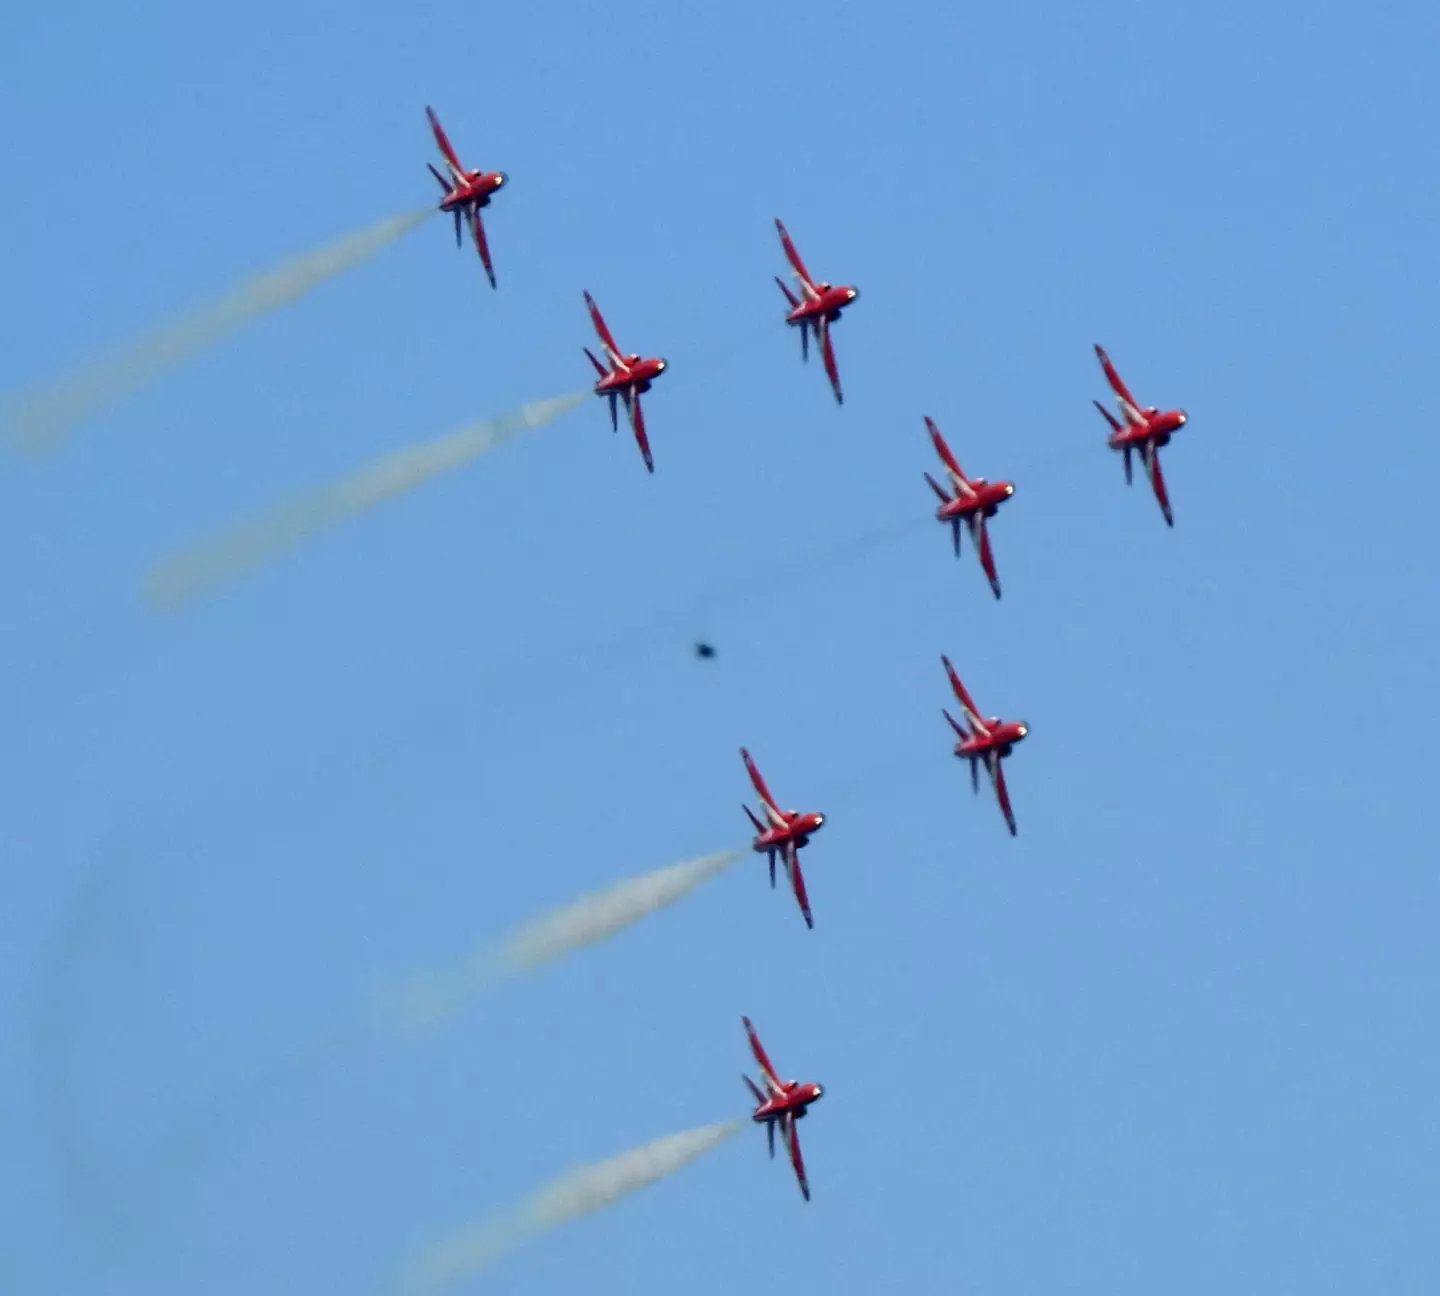 The Red Arrows soaring through the sky, but what's that in the background?